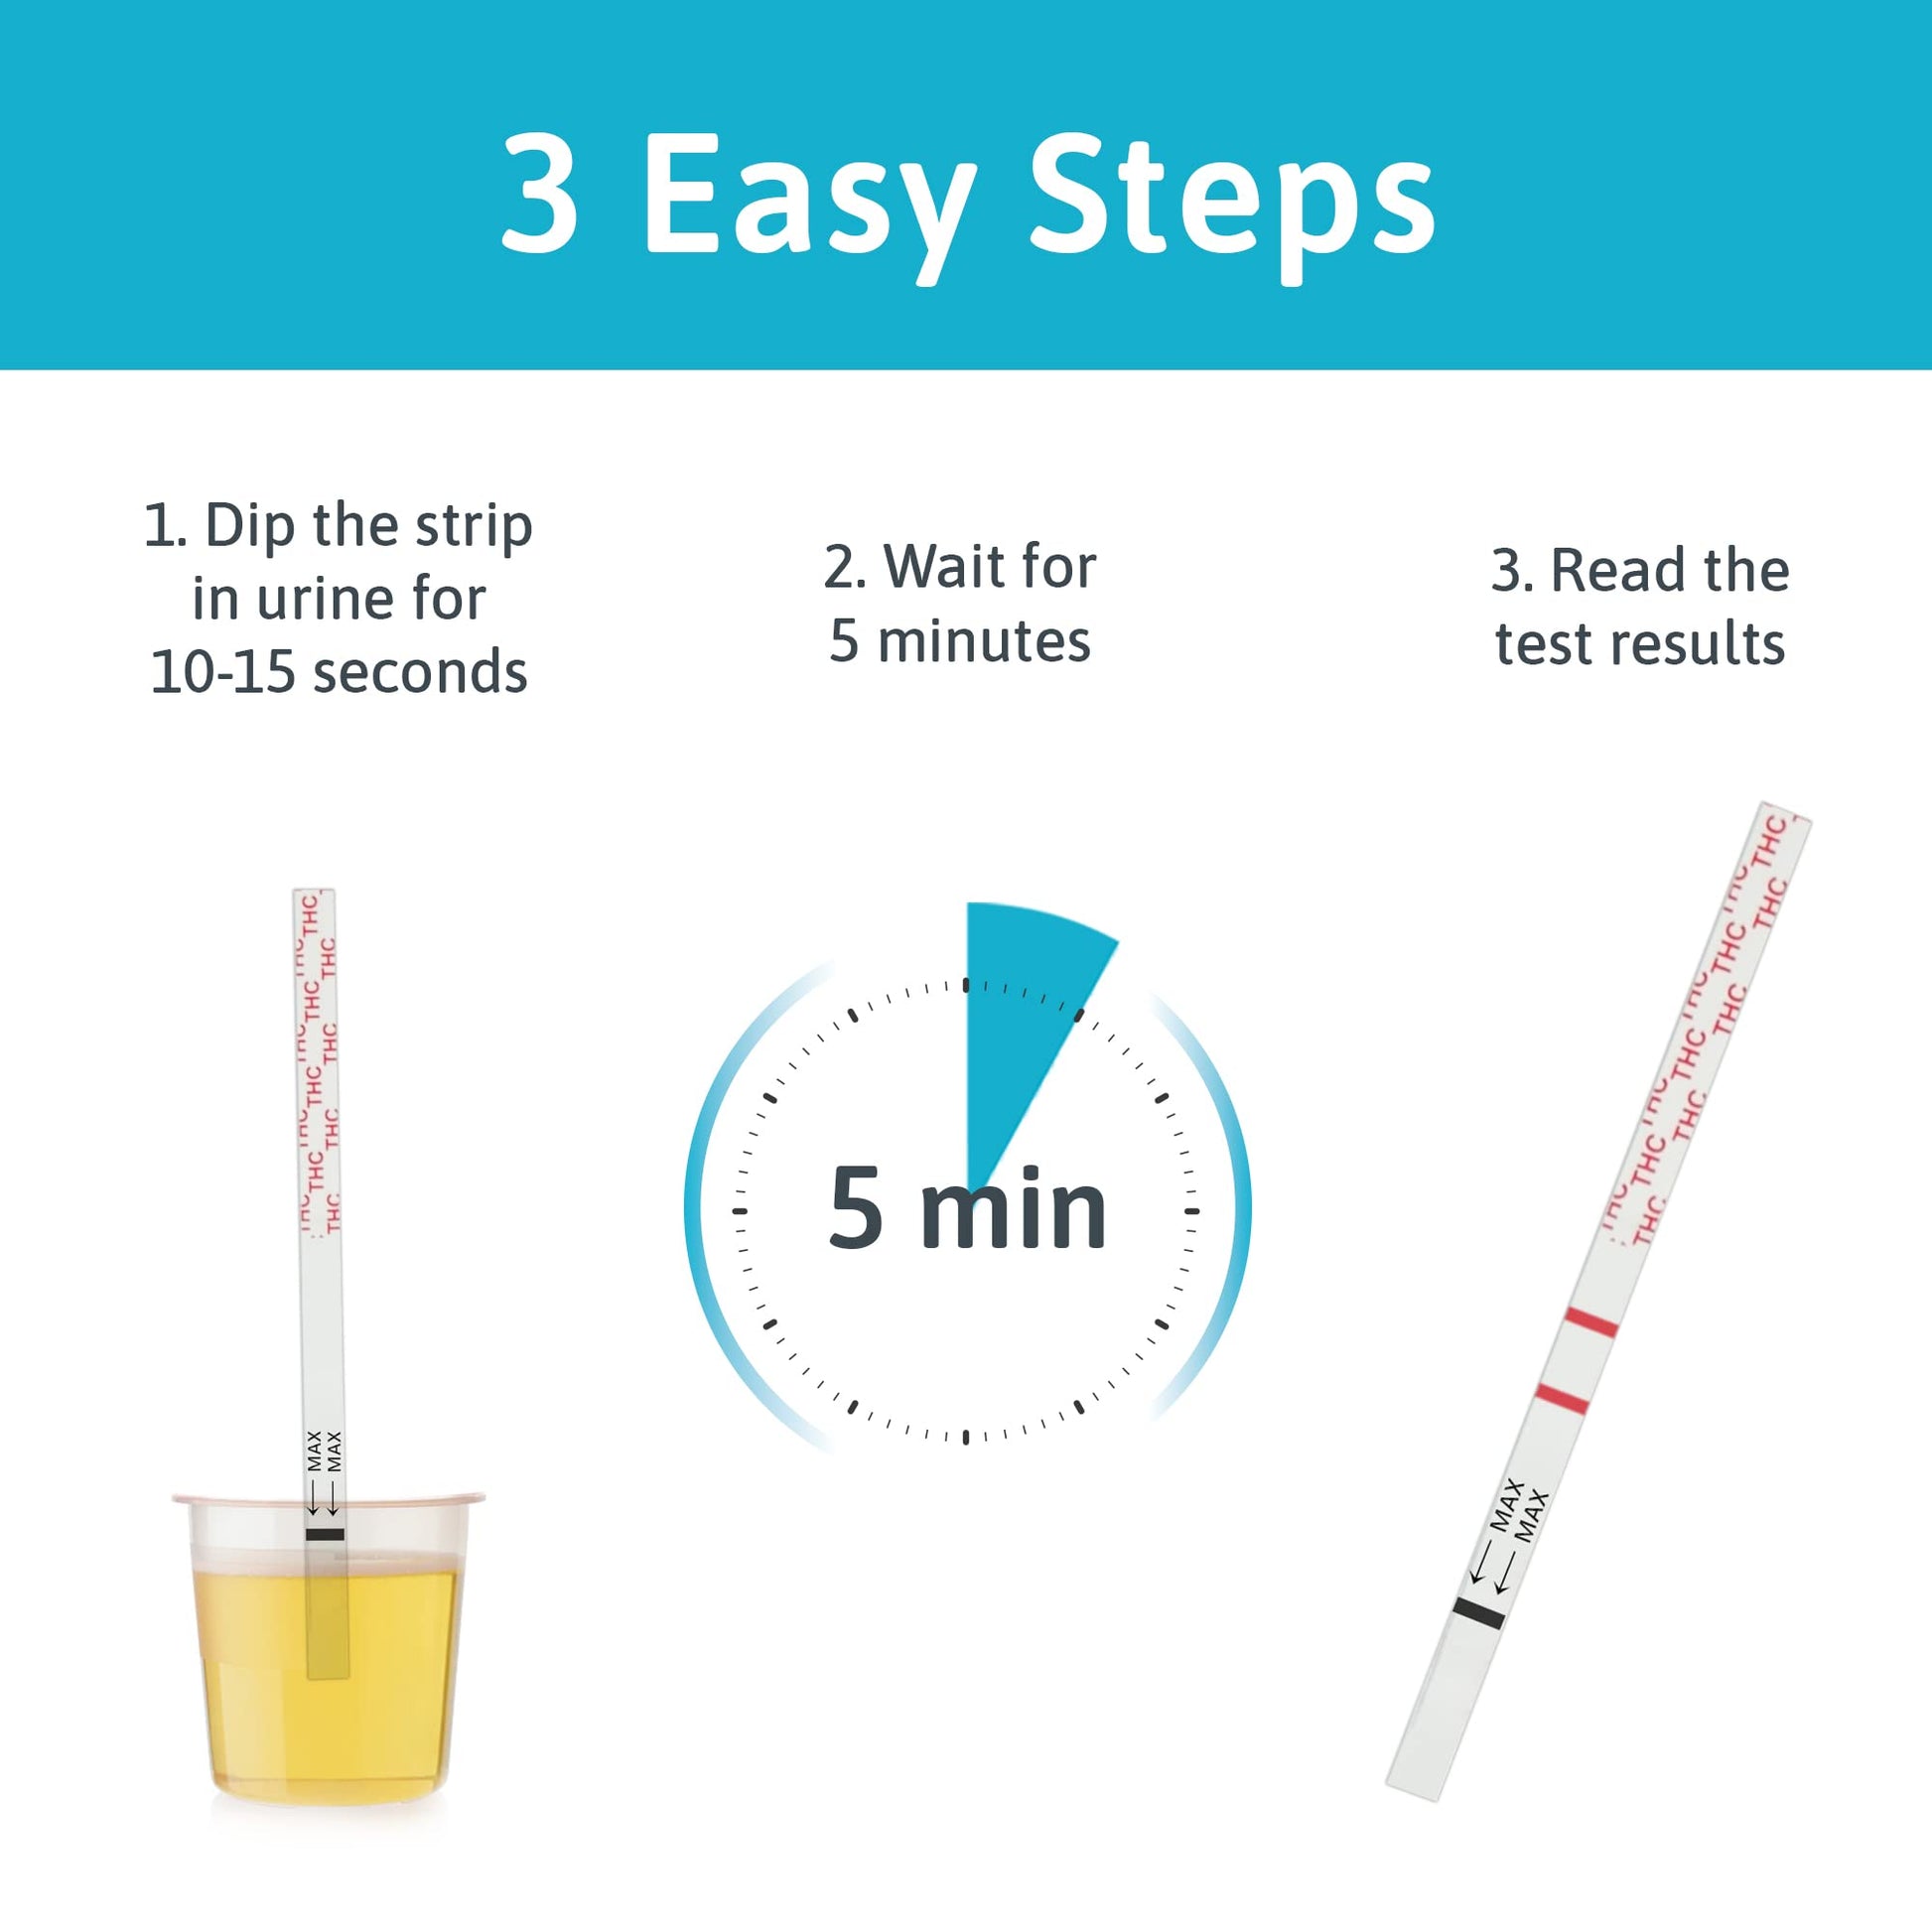 Illustrative image depicting the three easy steps of conducting a urine drug test: '1. Collect urine sample,' '2. Dip test strip into the sample,' and '3. Read results after a few minutes